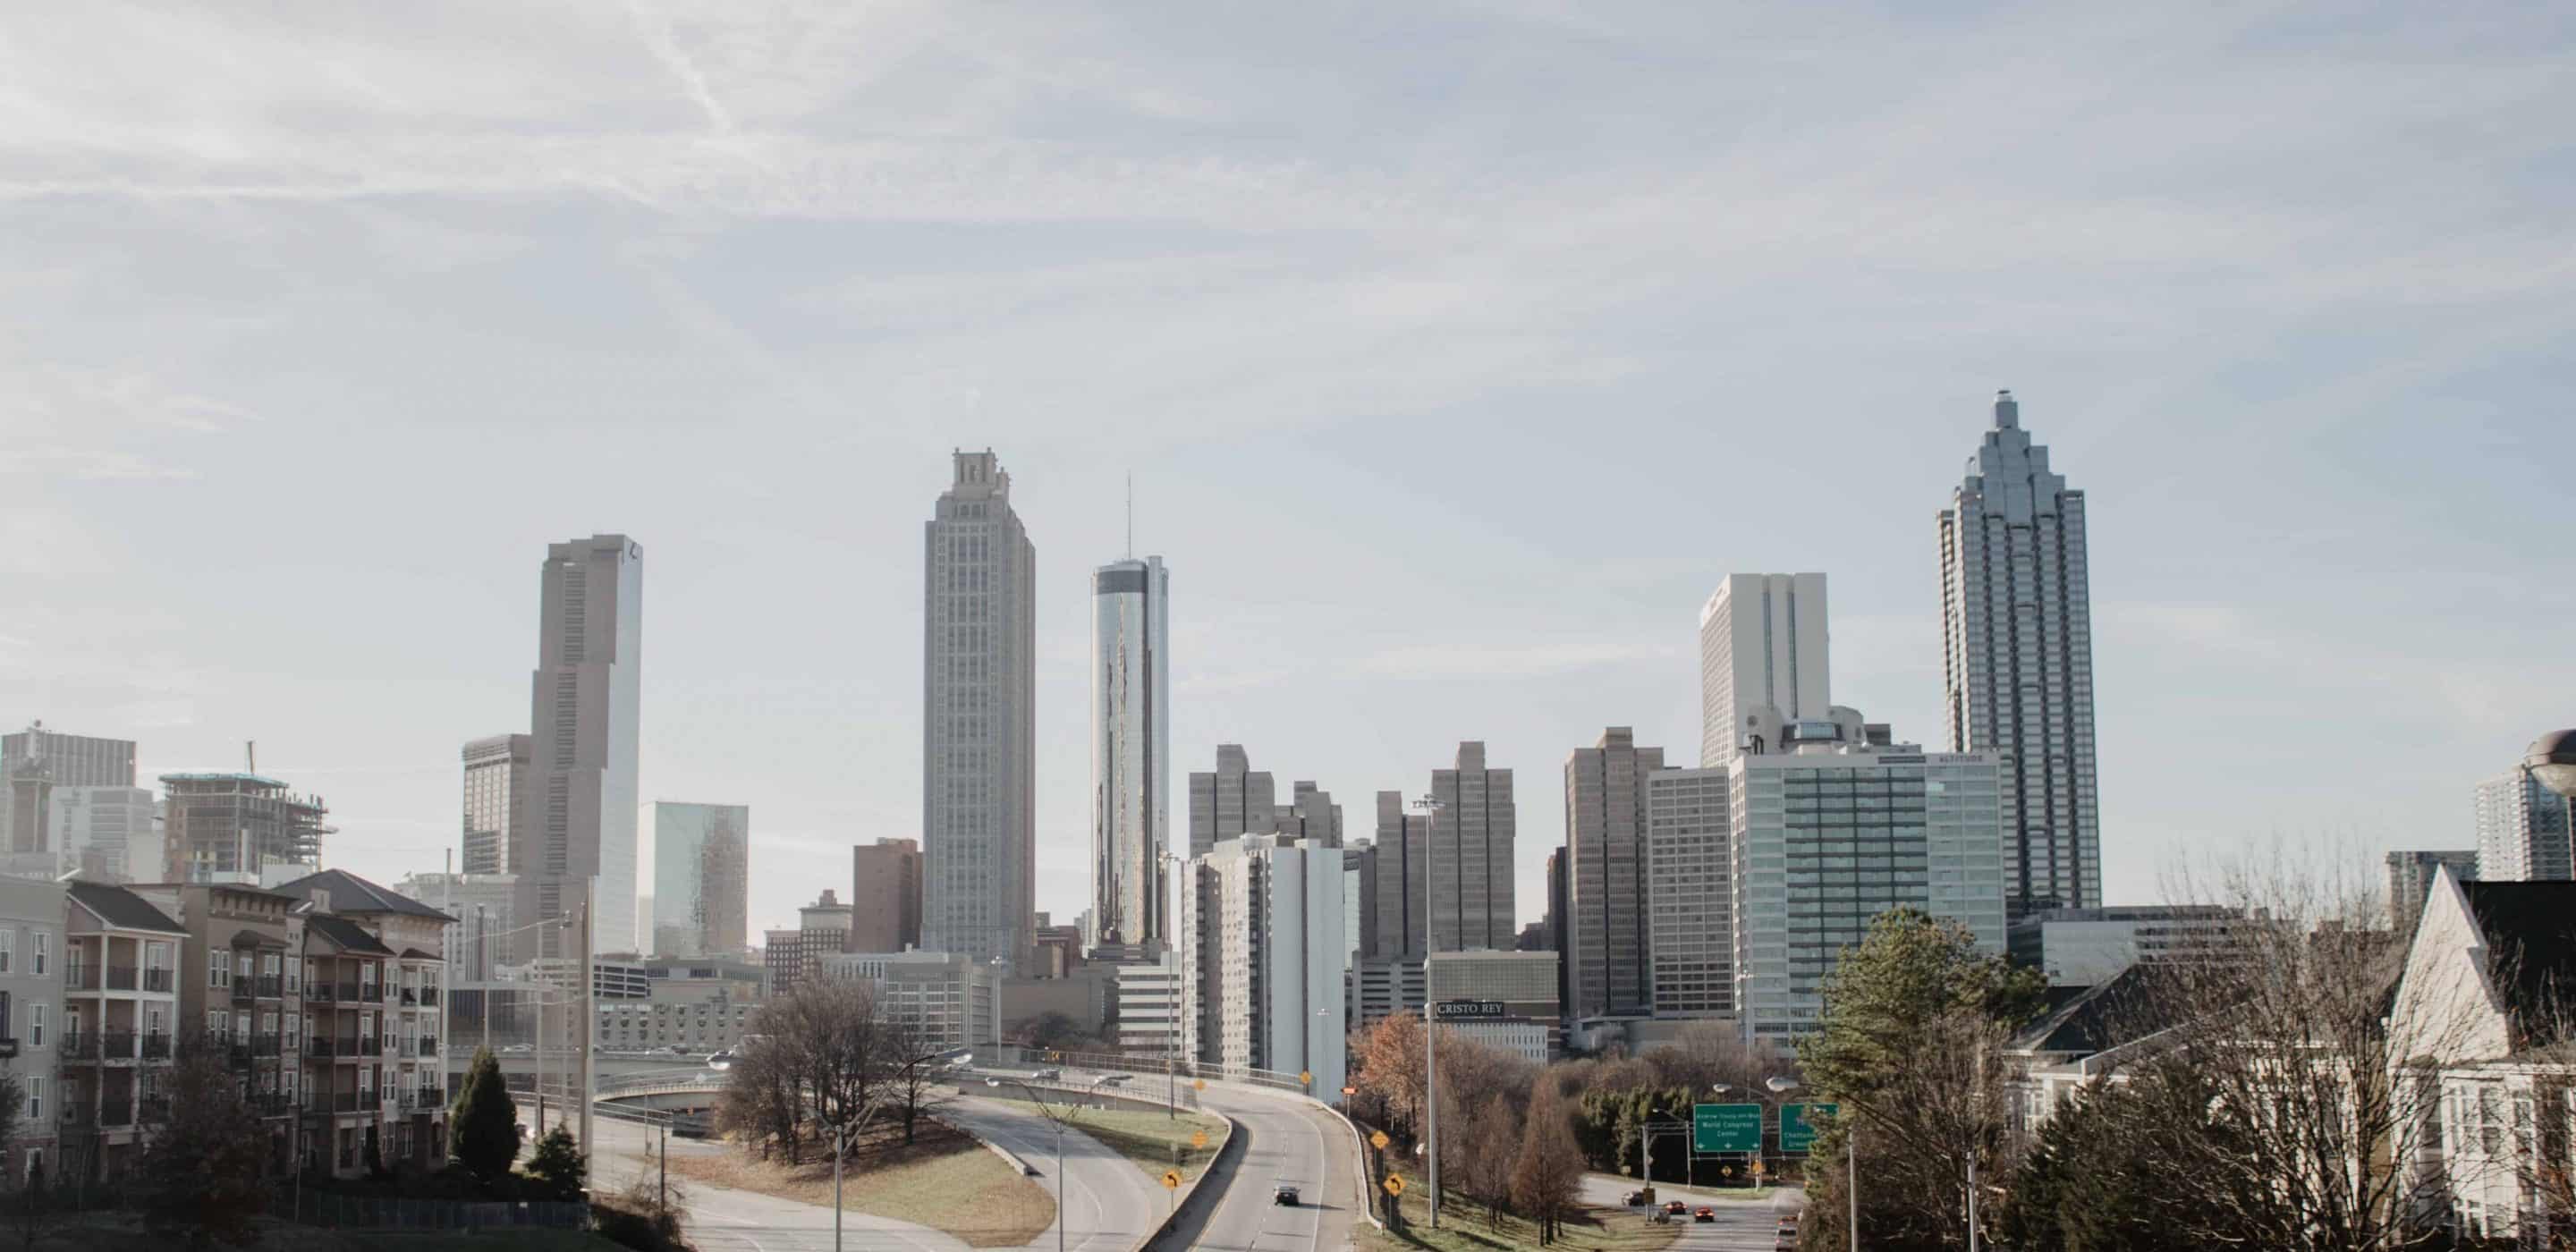 View of the Atlanta skyline during the daytime